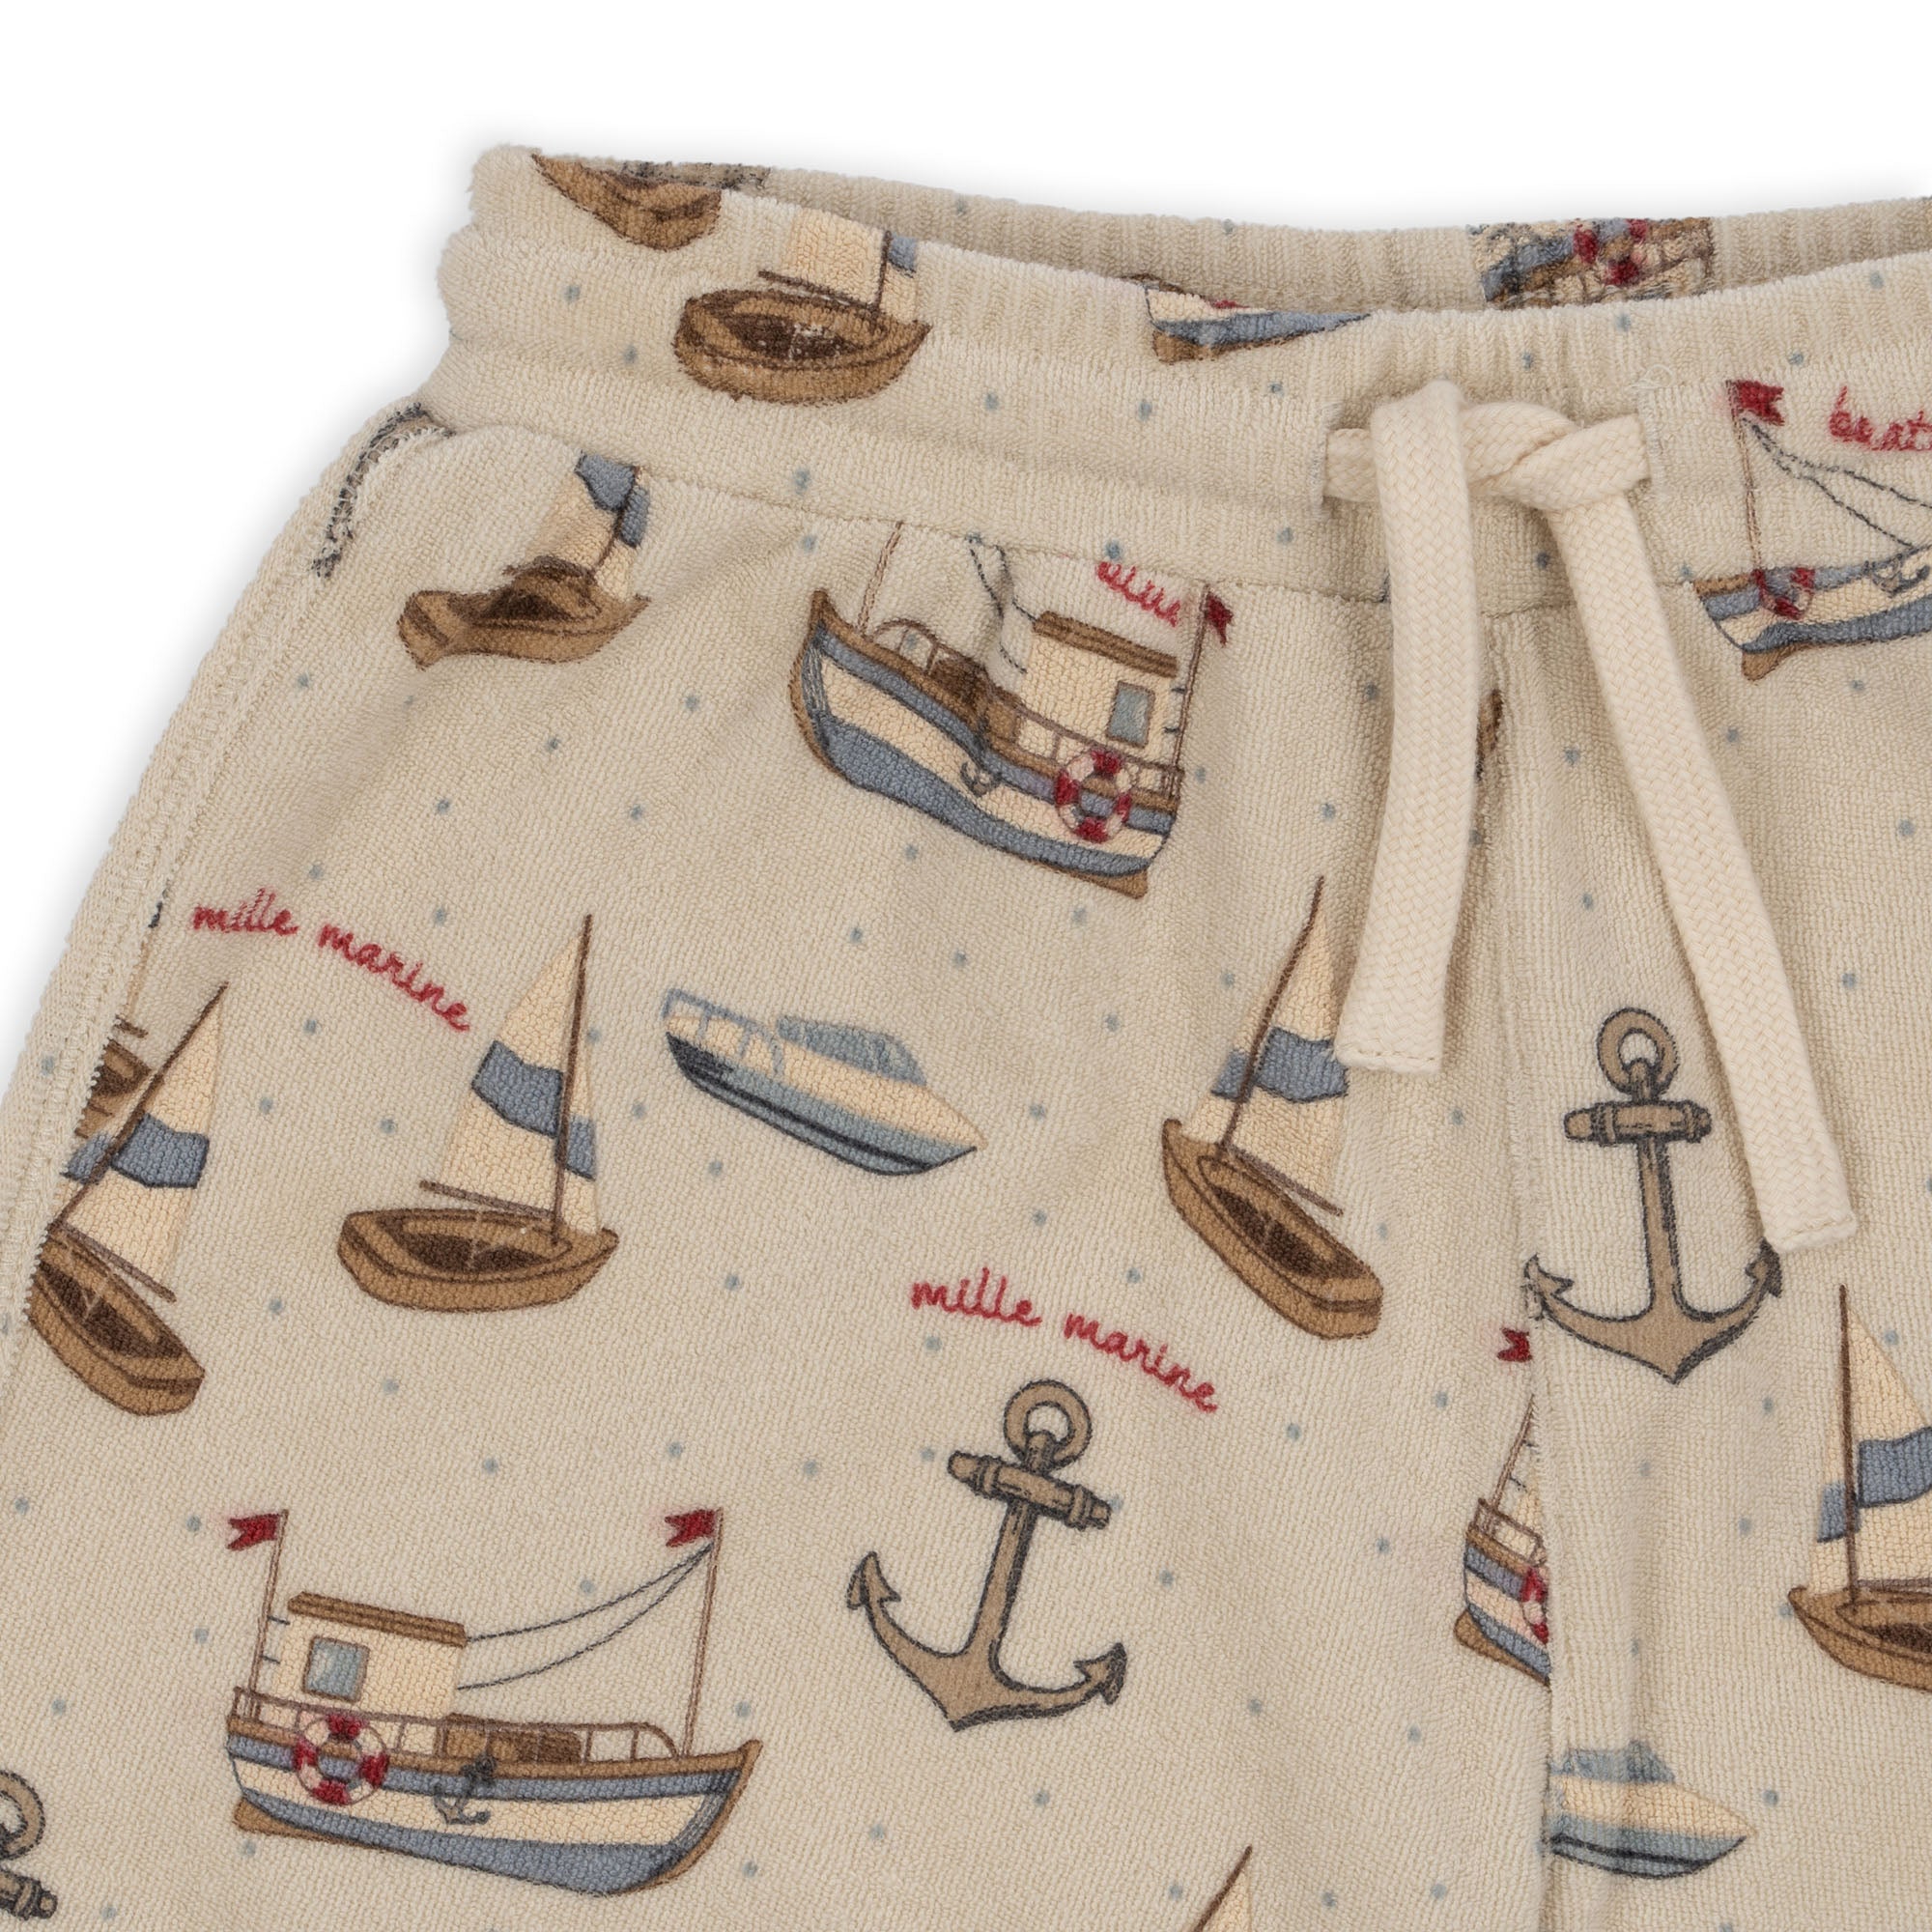 Konges Sløjd A/S ITTY SHORTS GOTS Shorts and bloomers - Jersey SAIL AWAY